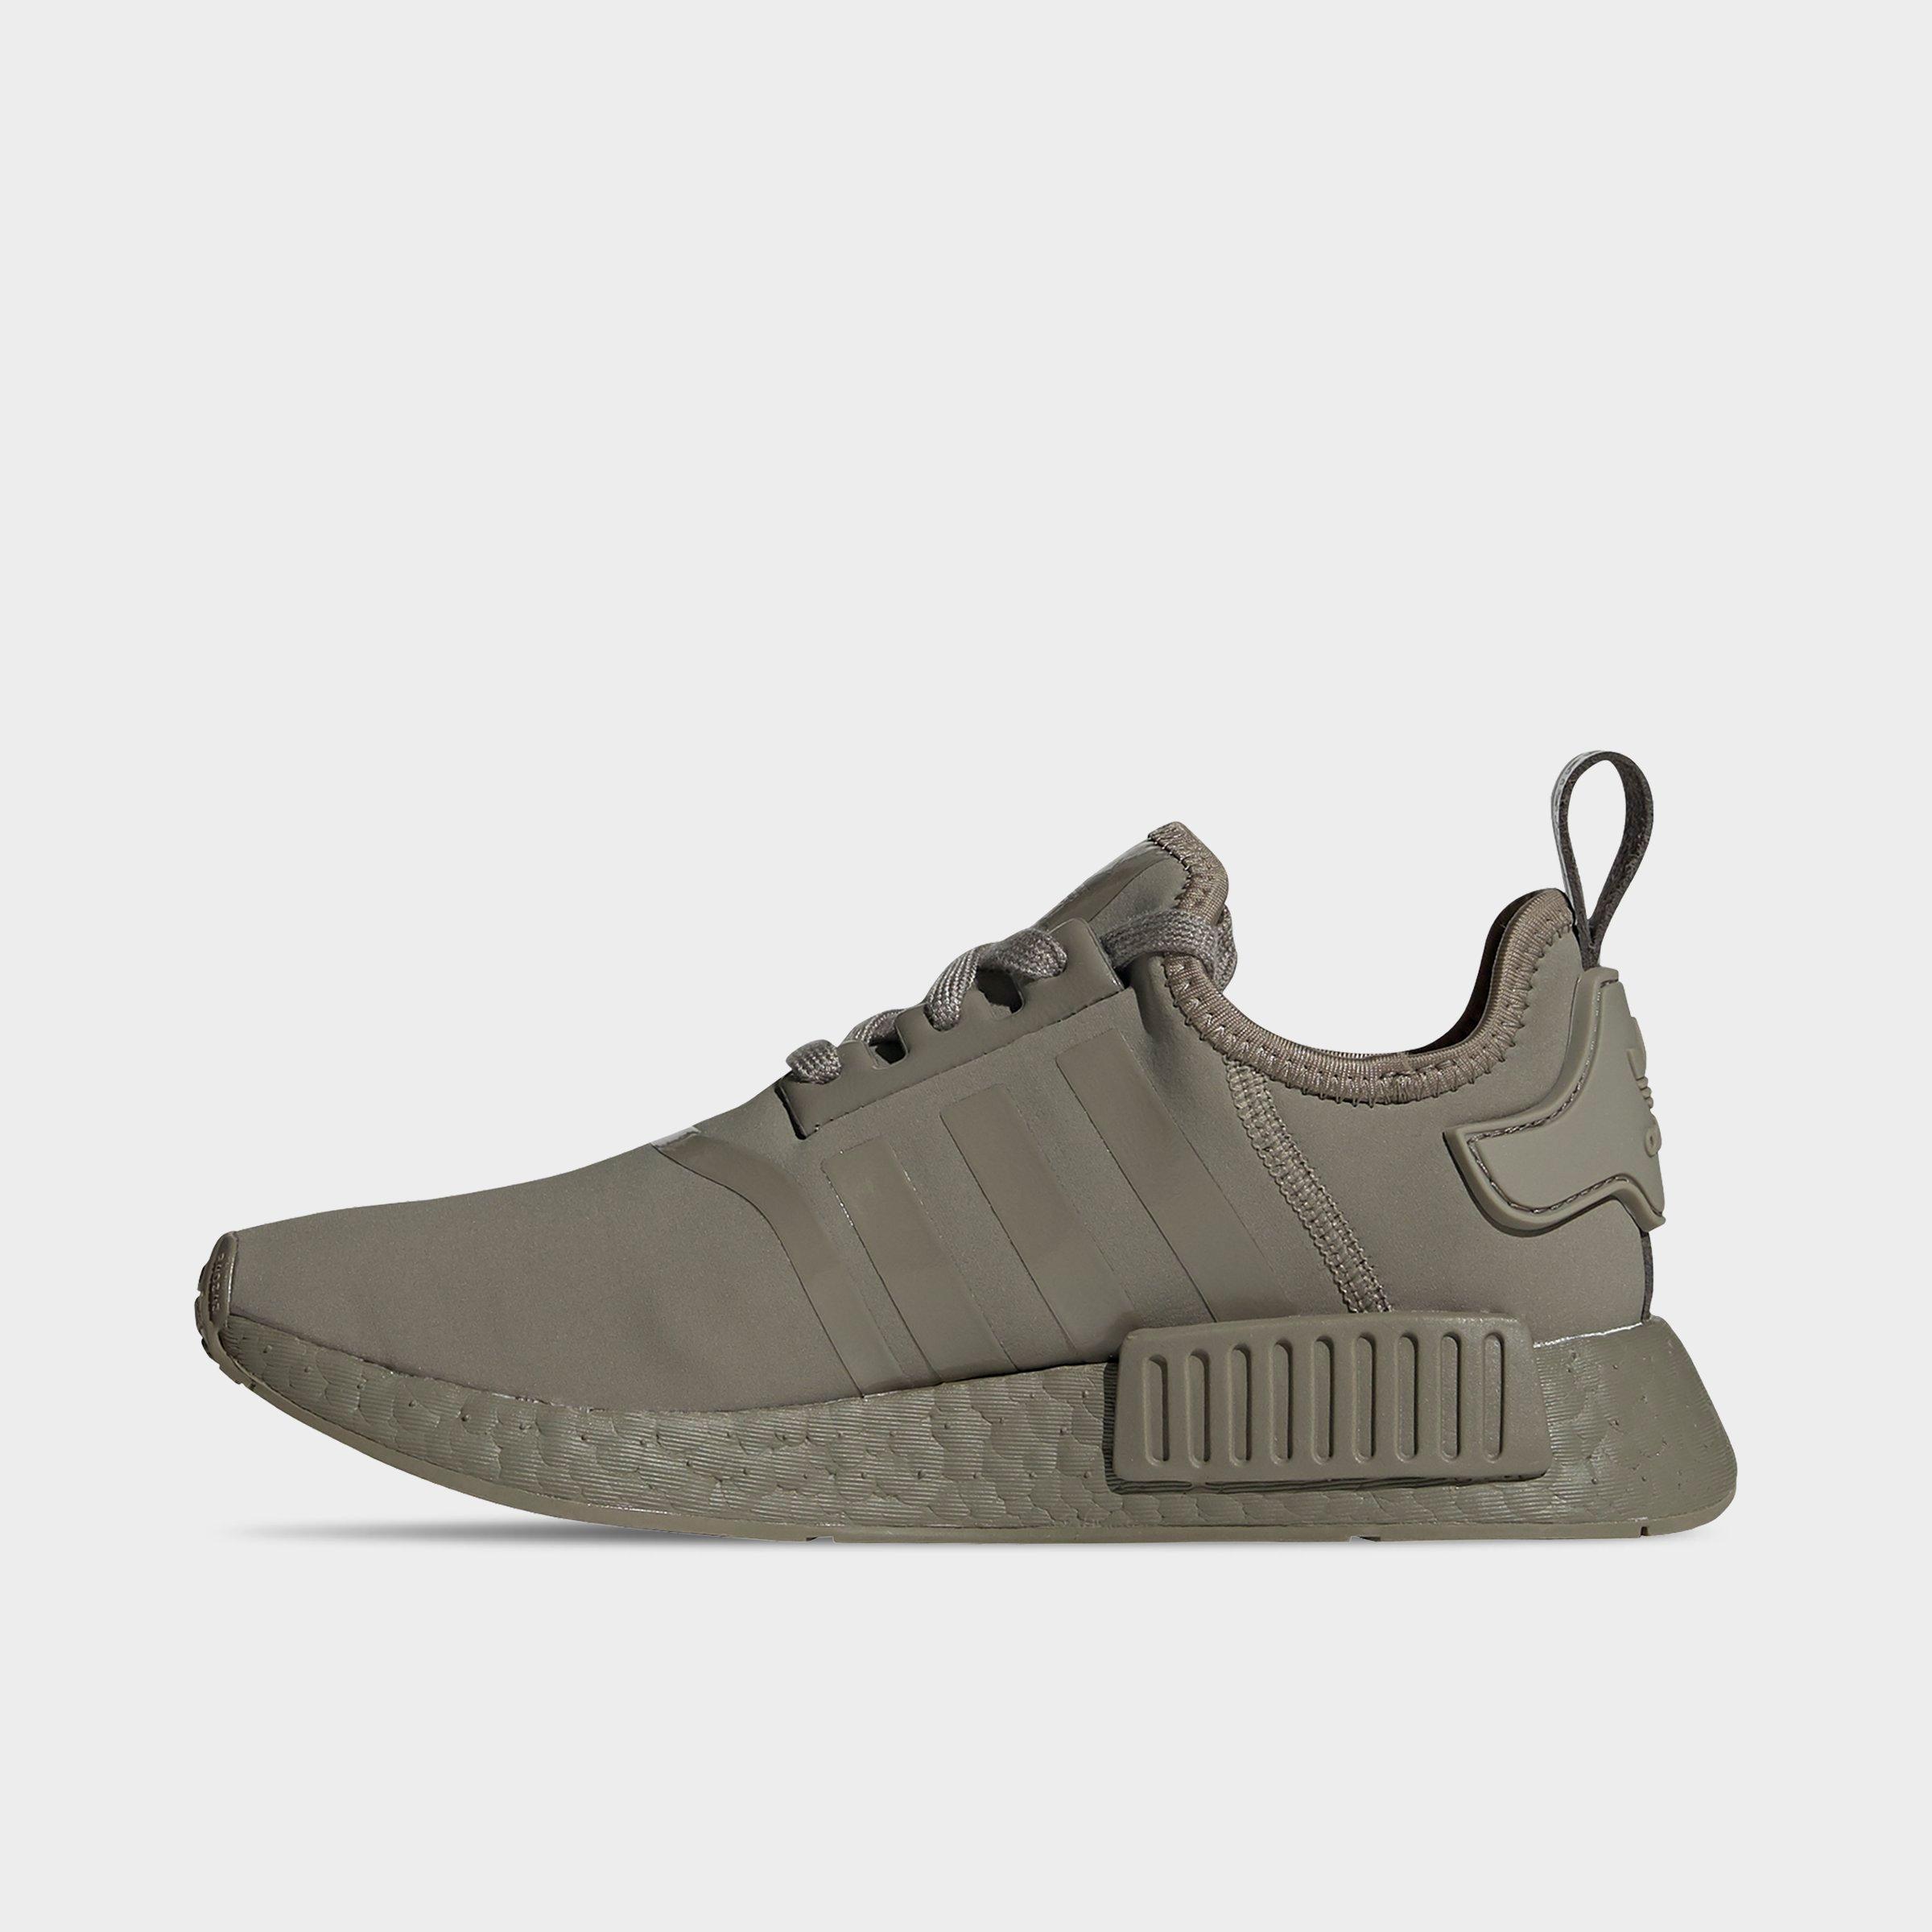 adidas nmd olive green womens